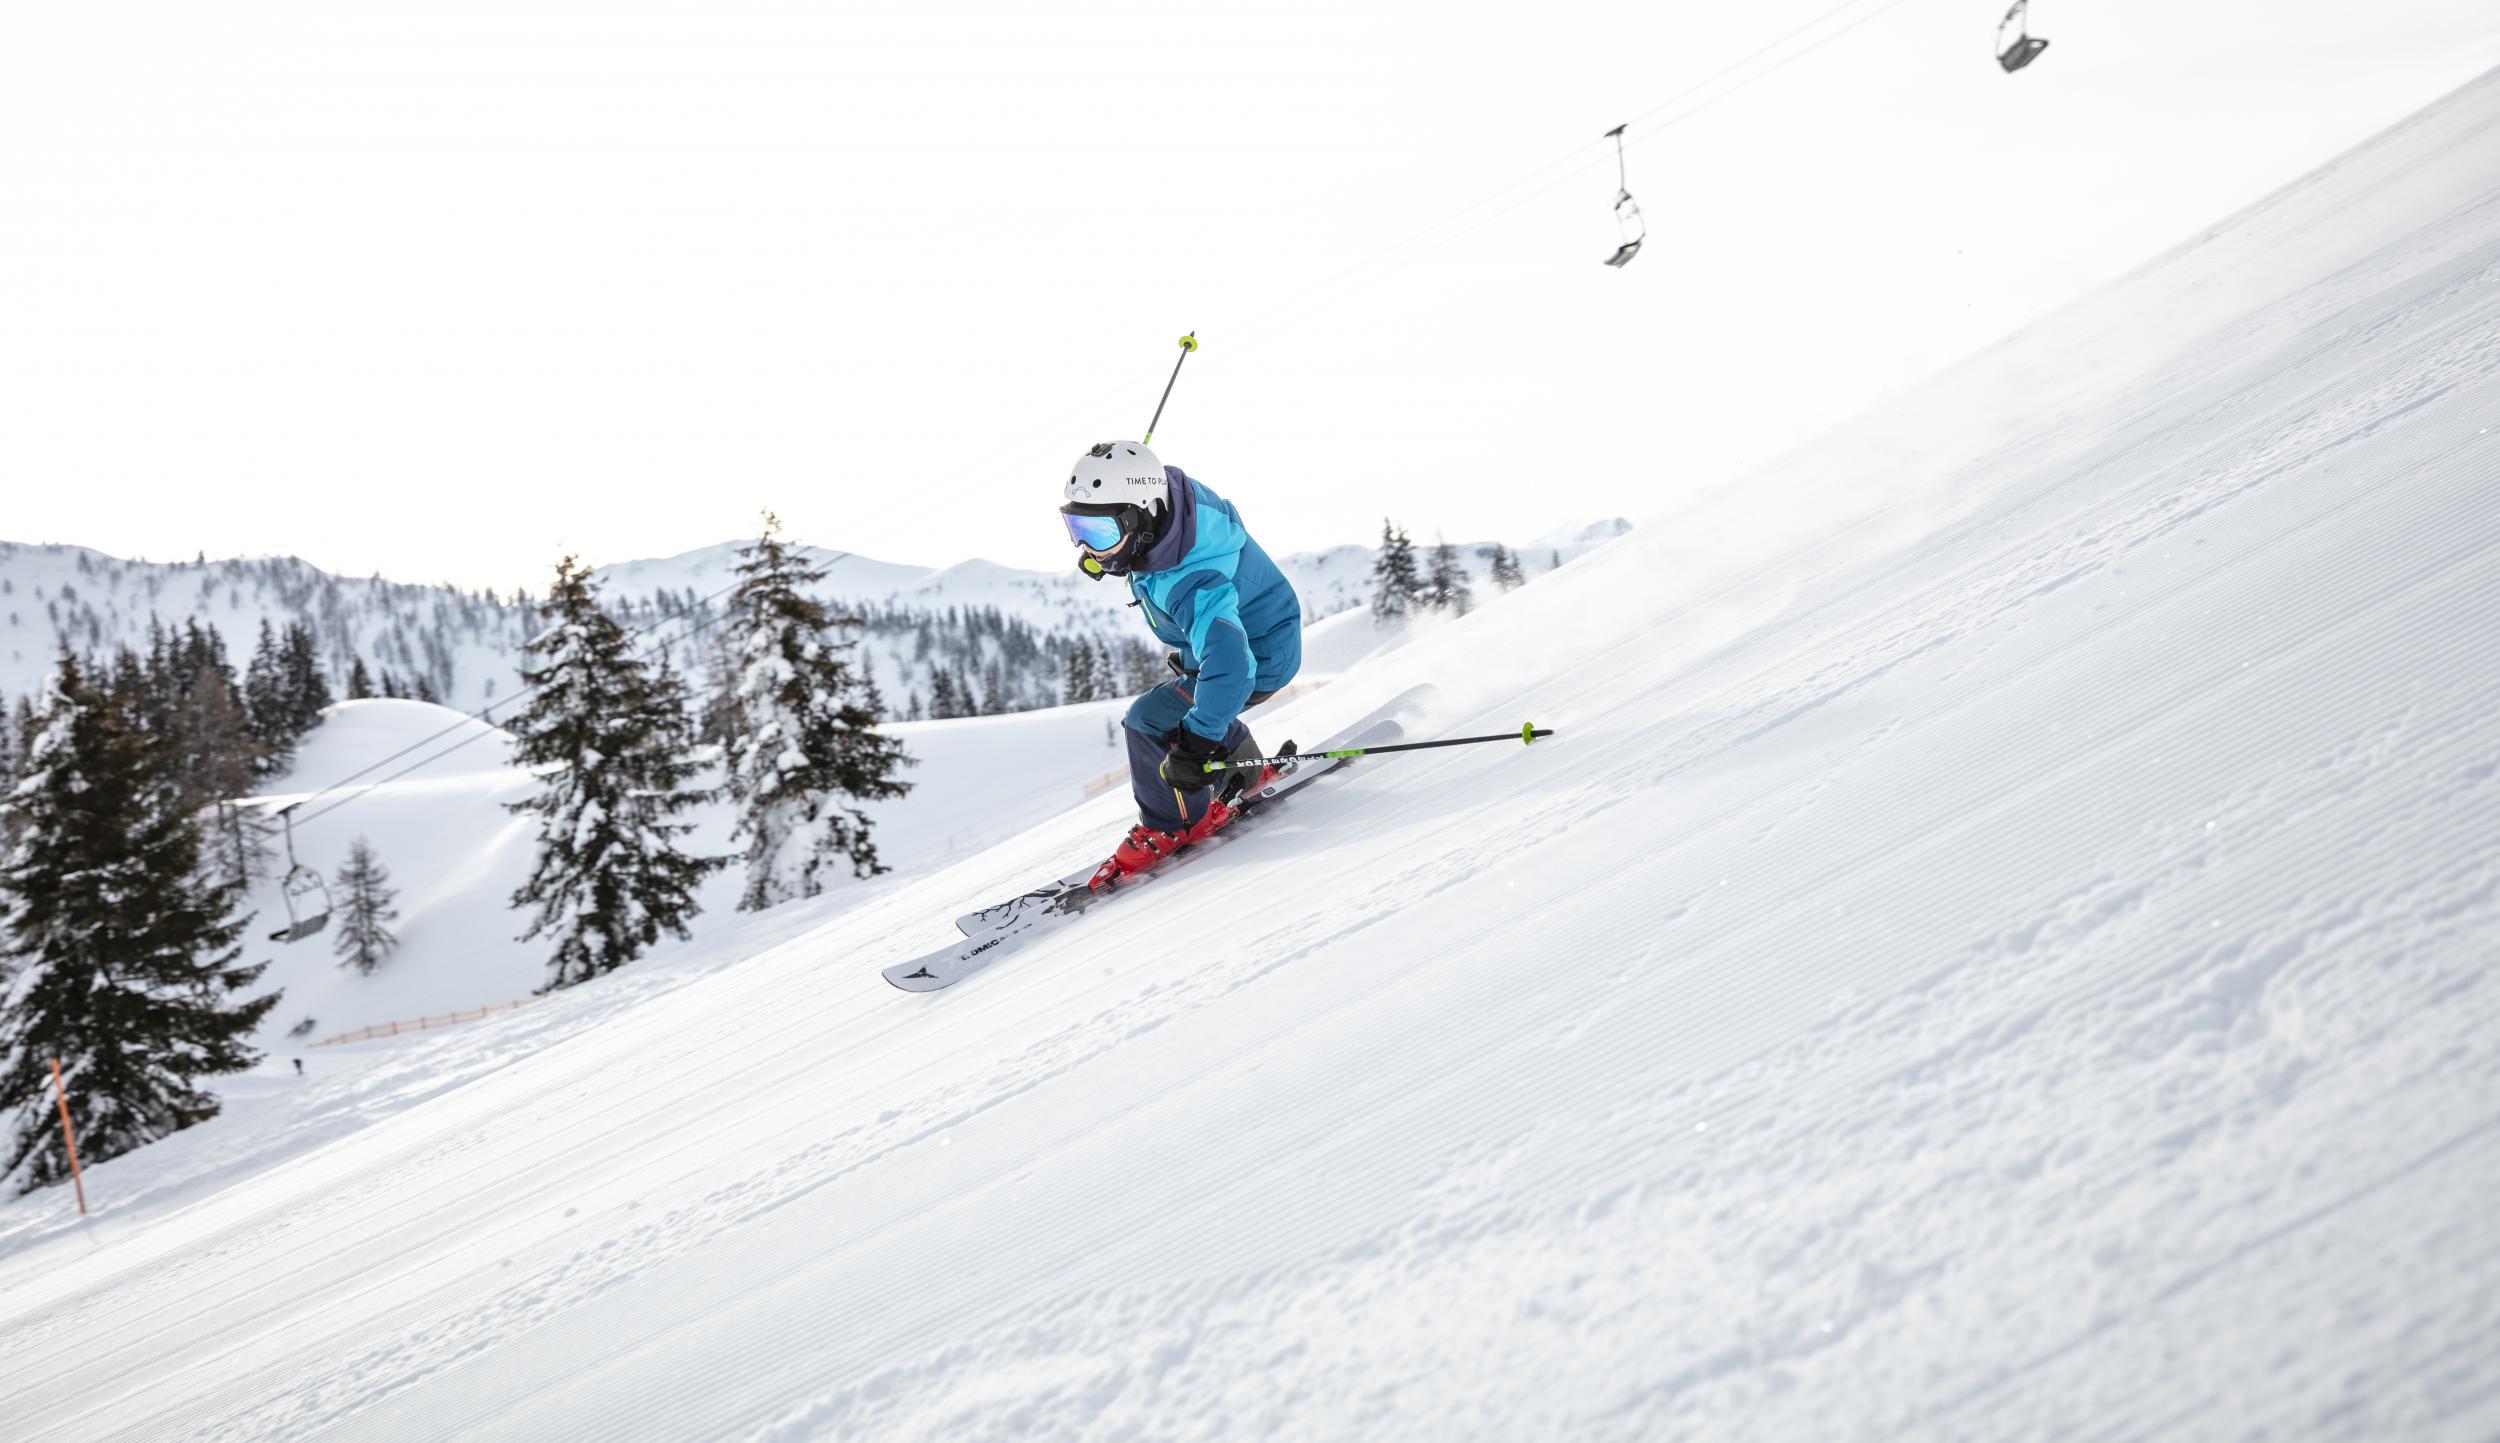 210km of exquisite pistes await you